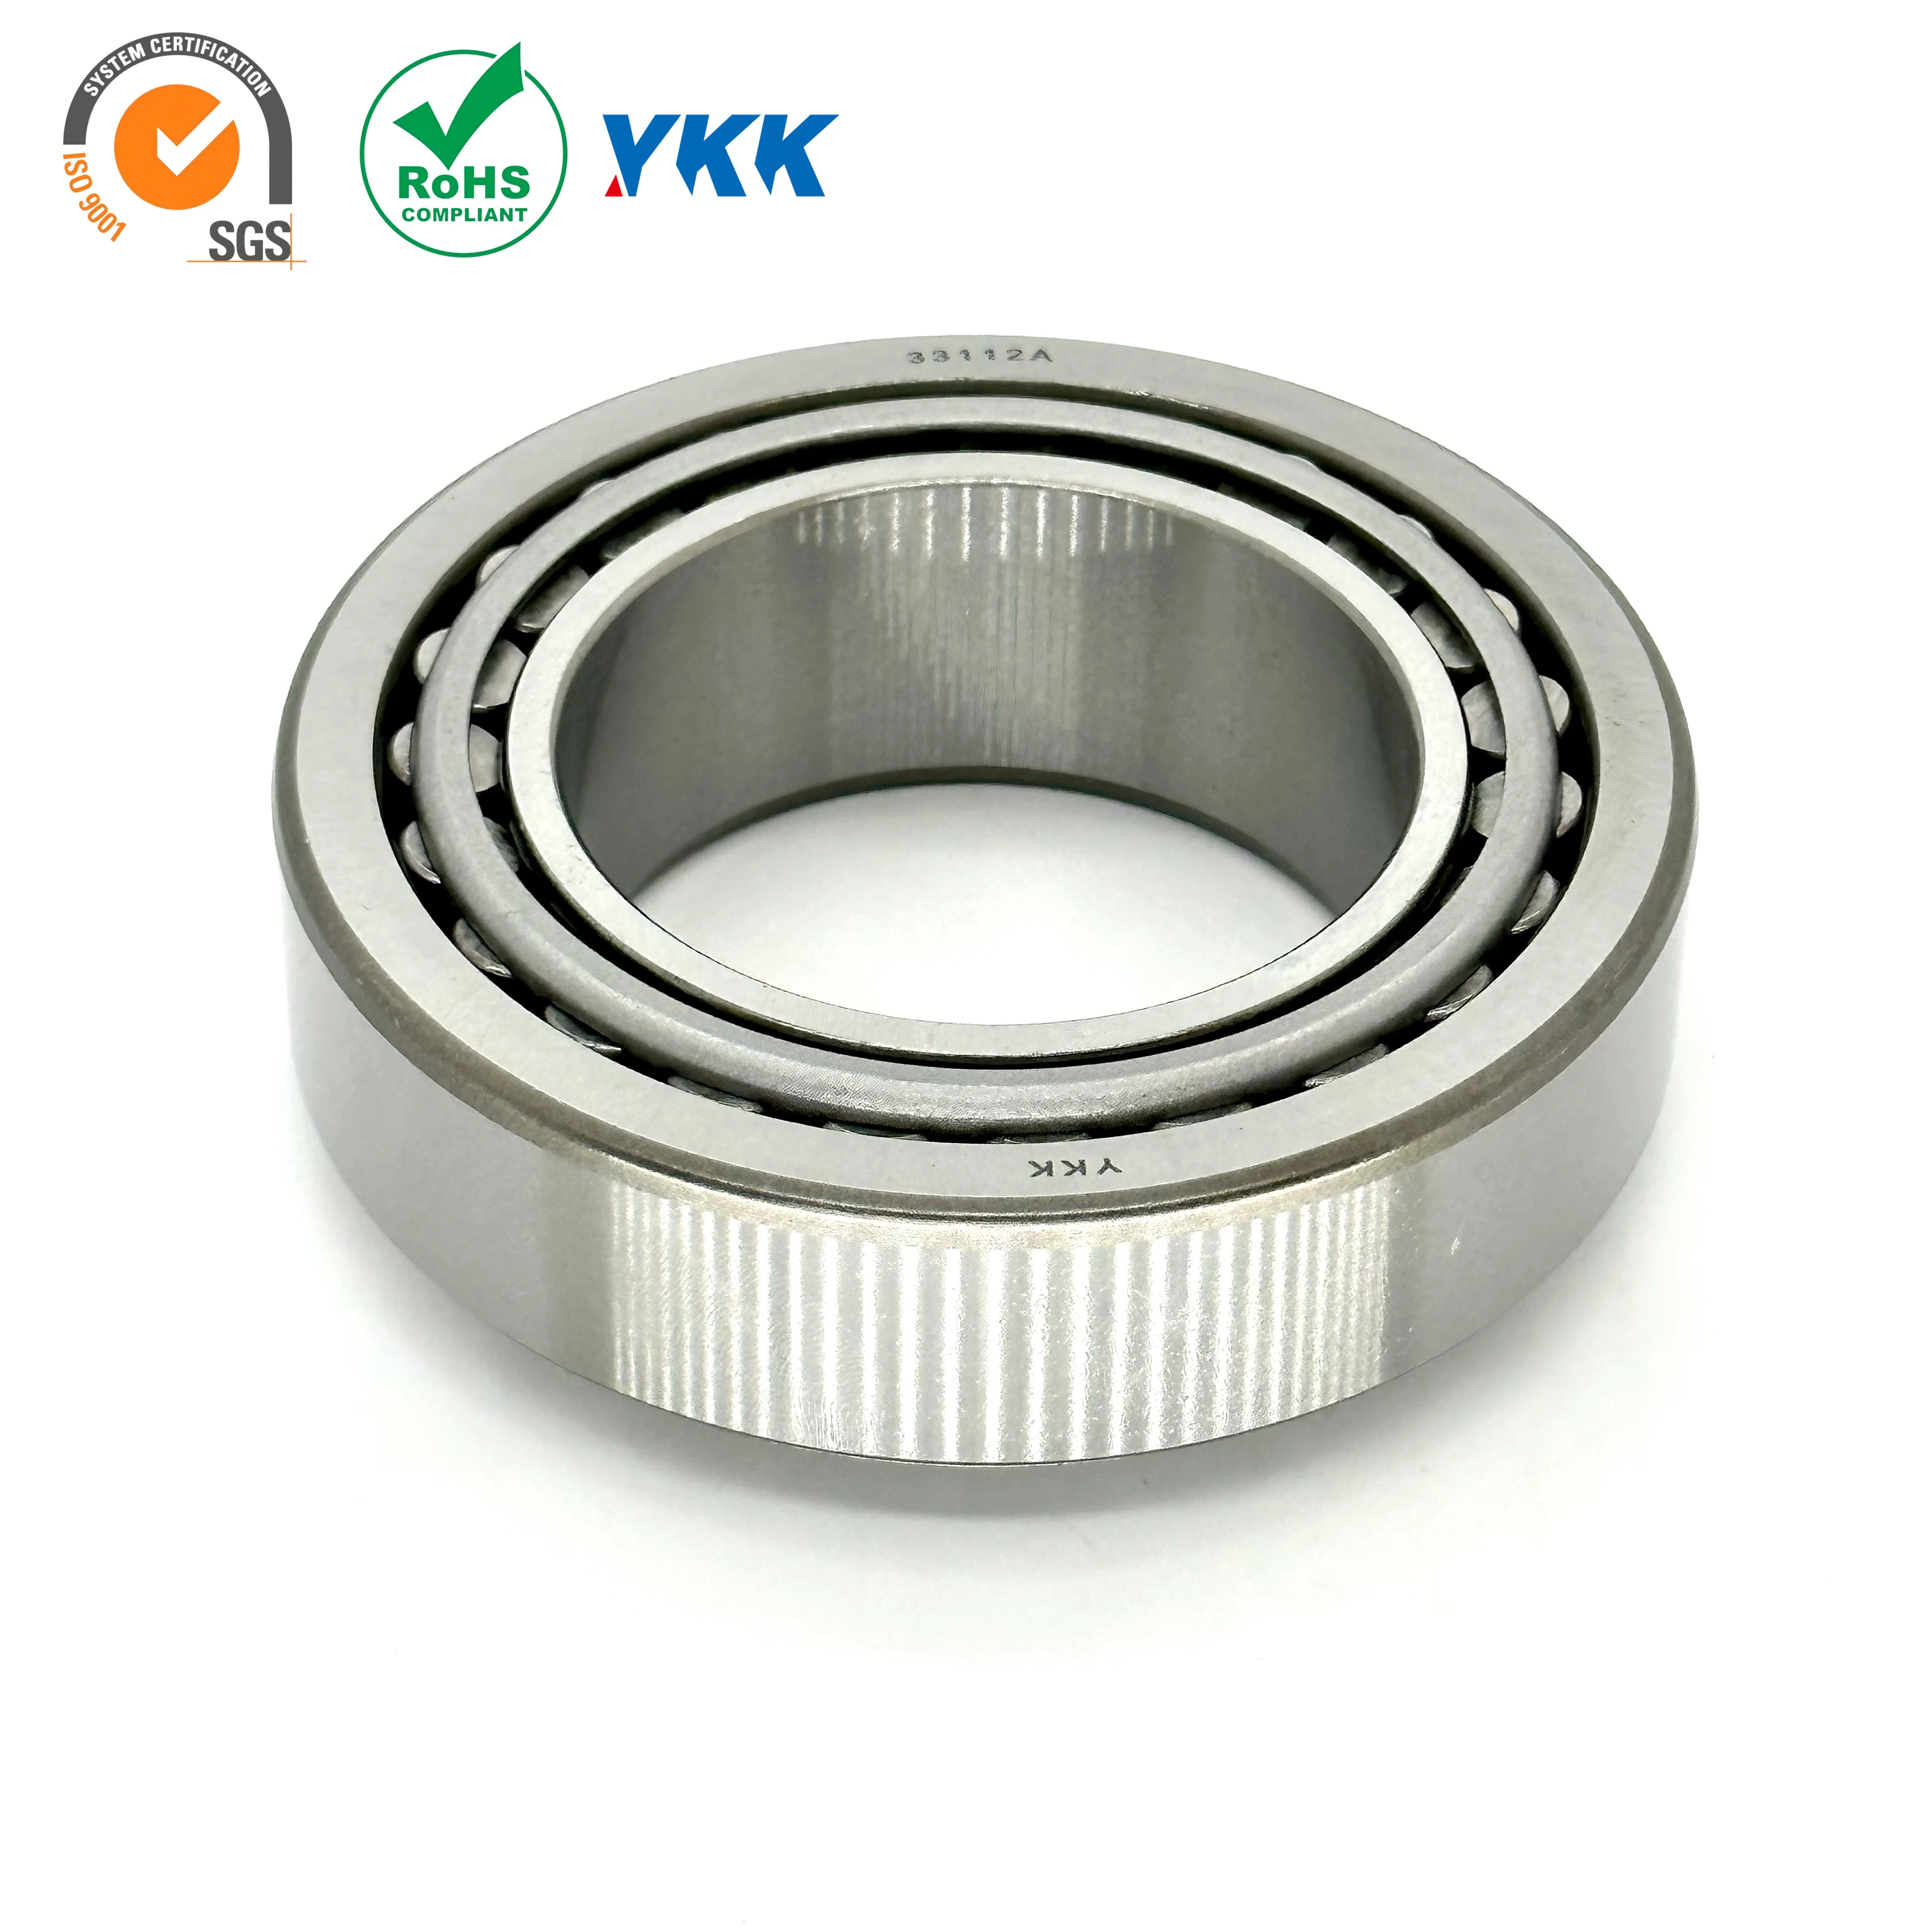 Ykk Seiko Bearing Hr30305c Hr30305dj Hr320/28xj Hr302/28 Hr302/28c Hr322/28  Hr322/28cj Hr303/28 Hr303/28c Tapered Roller Bearing - Buy 688td/672 Timken  Tapered Roller Bearing,Skf Taper Roller Bearing L44649/l44610,Cylindrical  Roller Bearings Product on ...